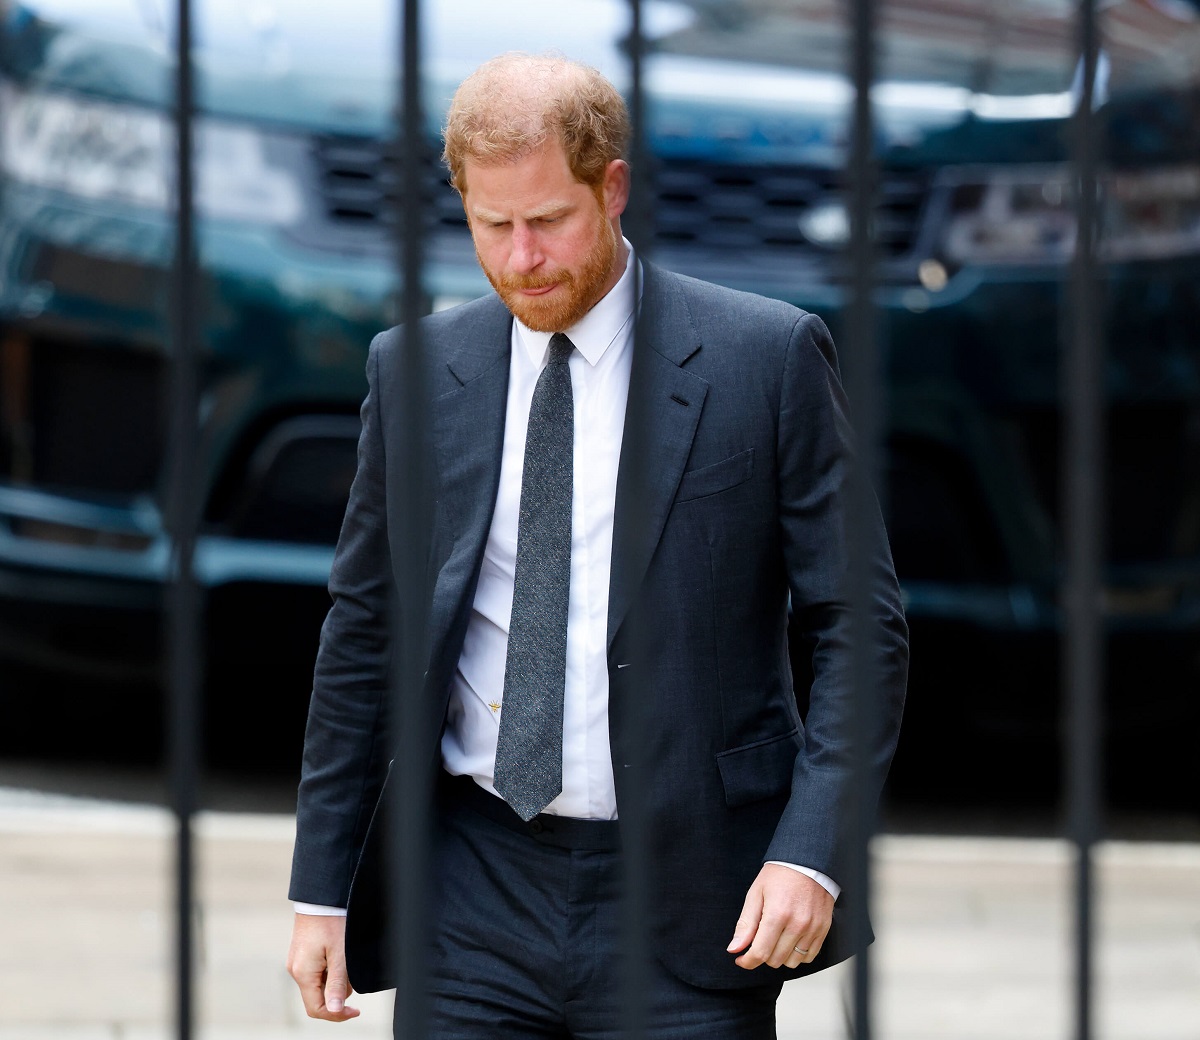 Prince Harry arrives at the Royal Courts of Justice